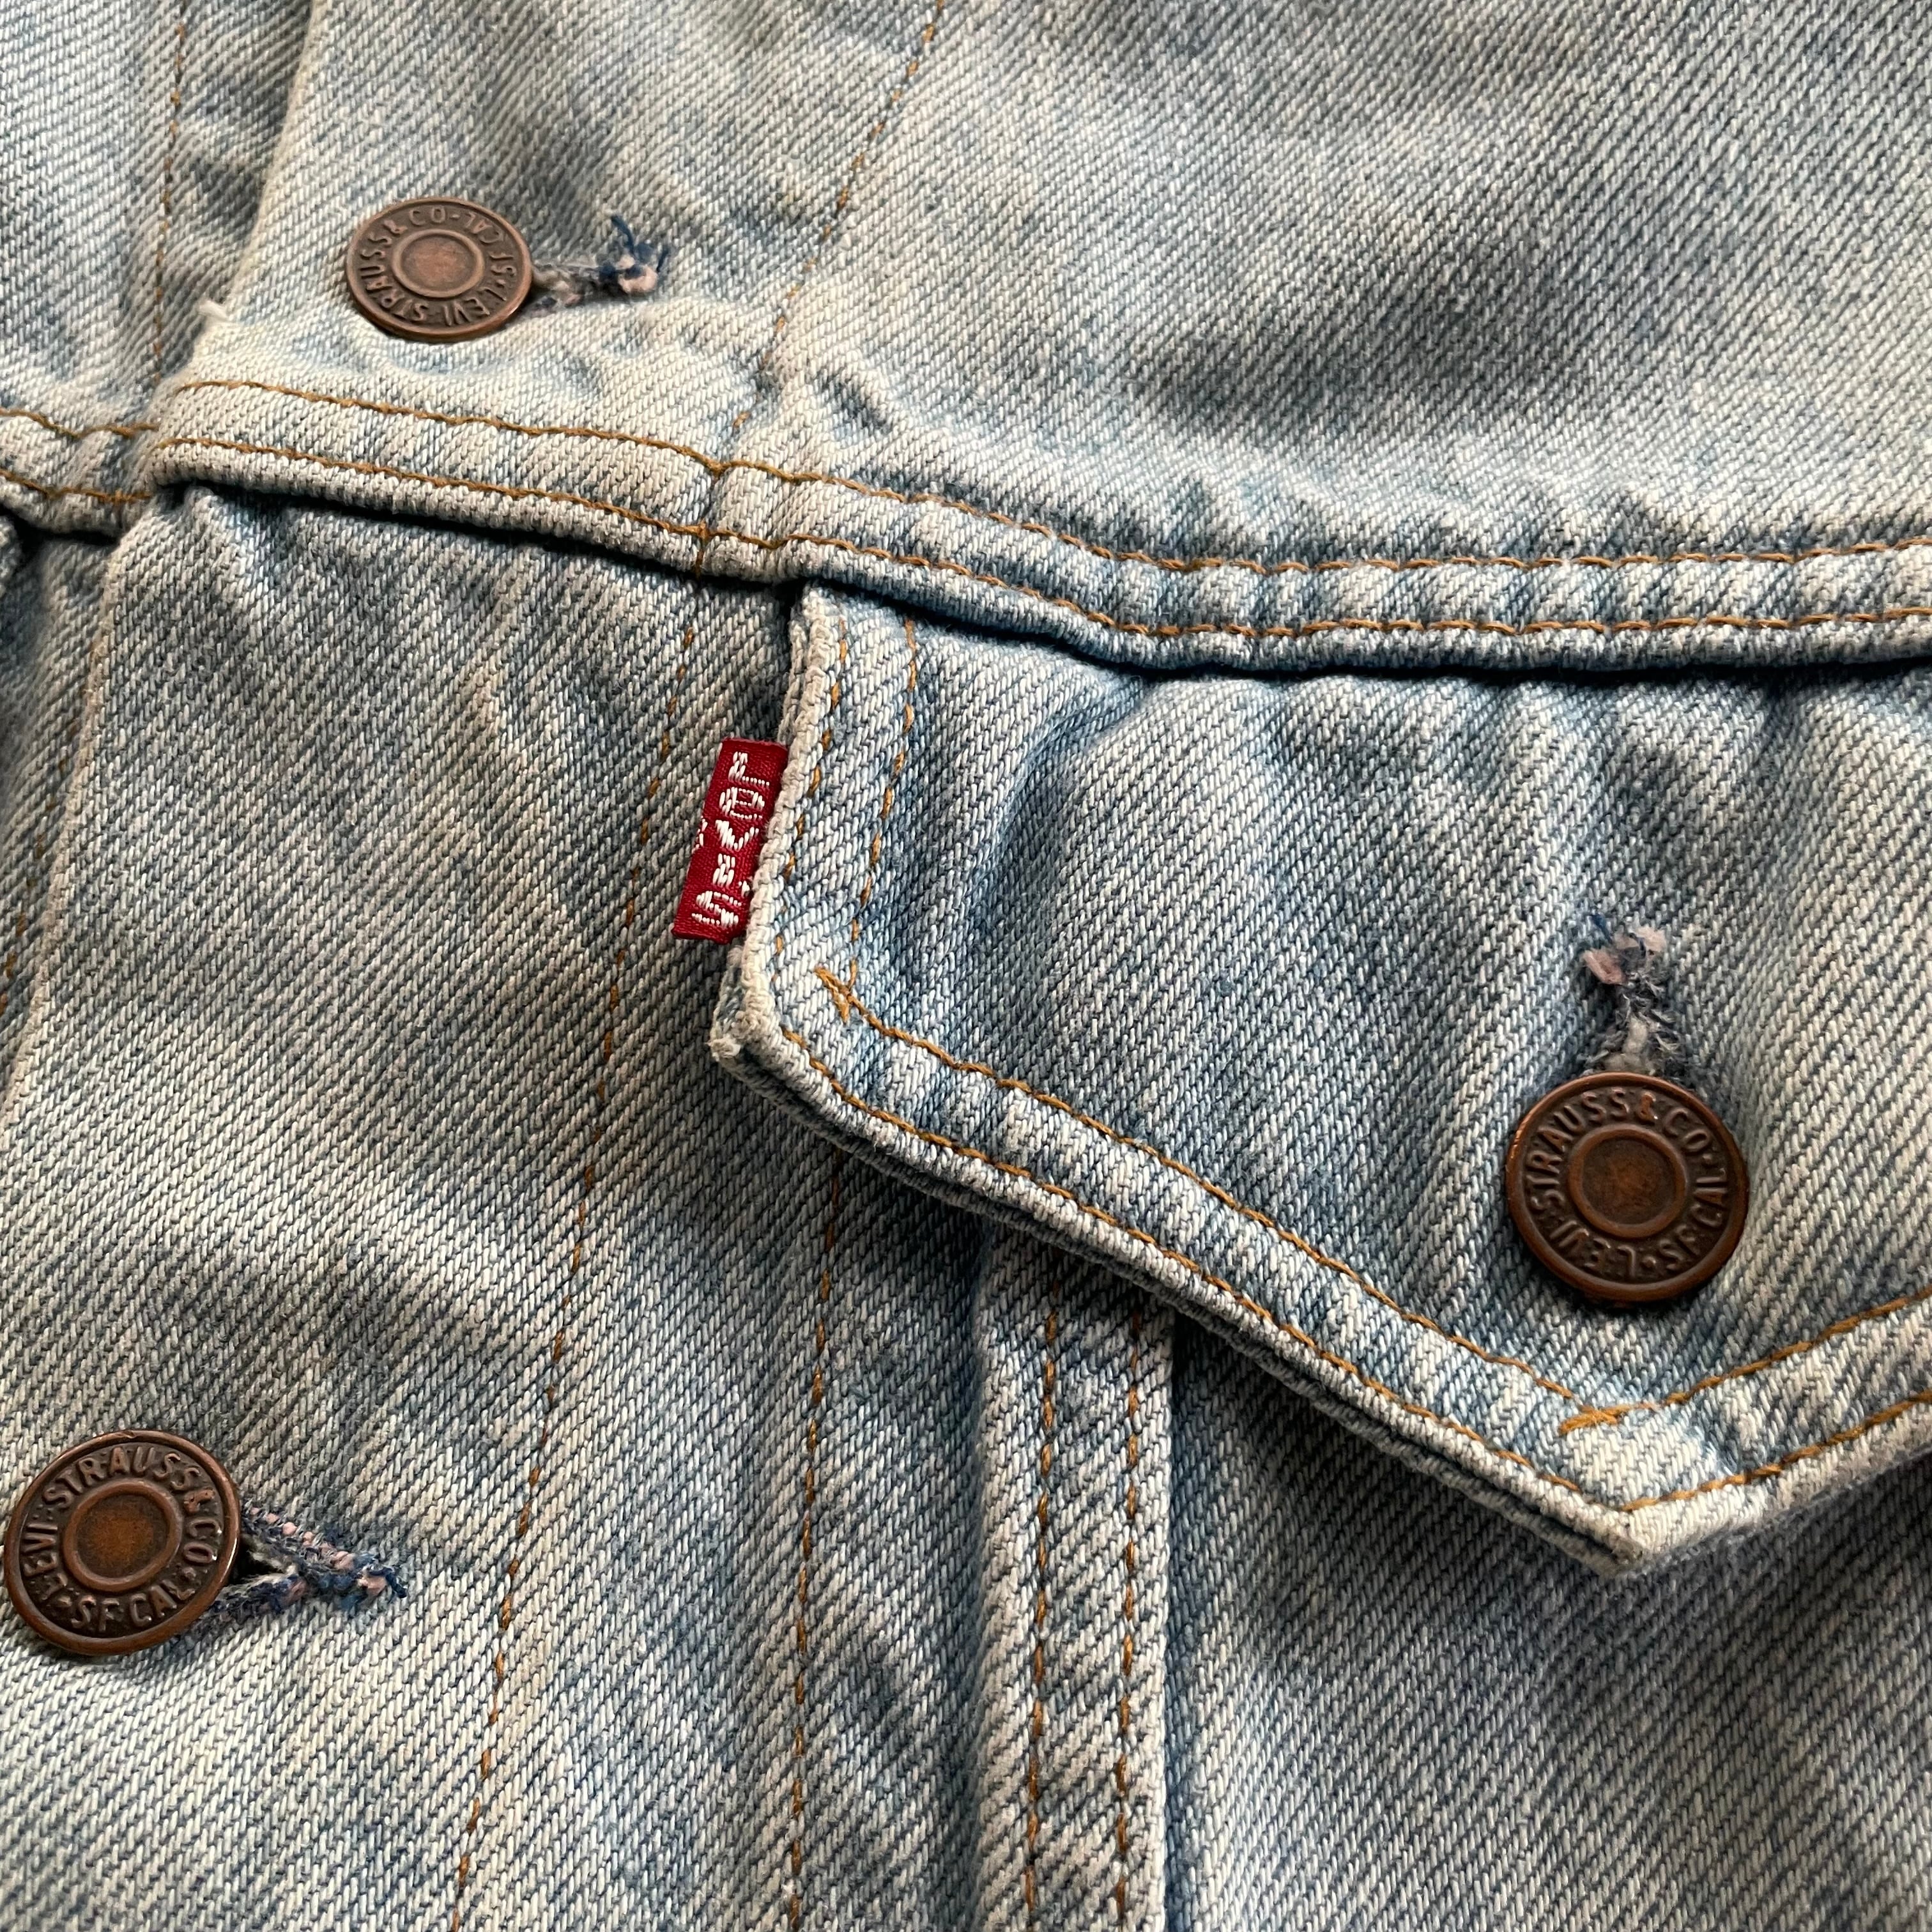 Levi's/90s ice blue denim jacket 75506-4843 made in Canada 